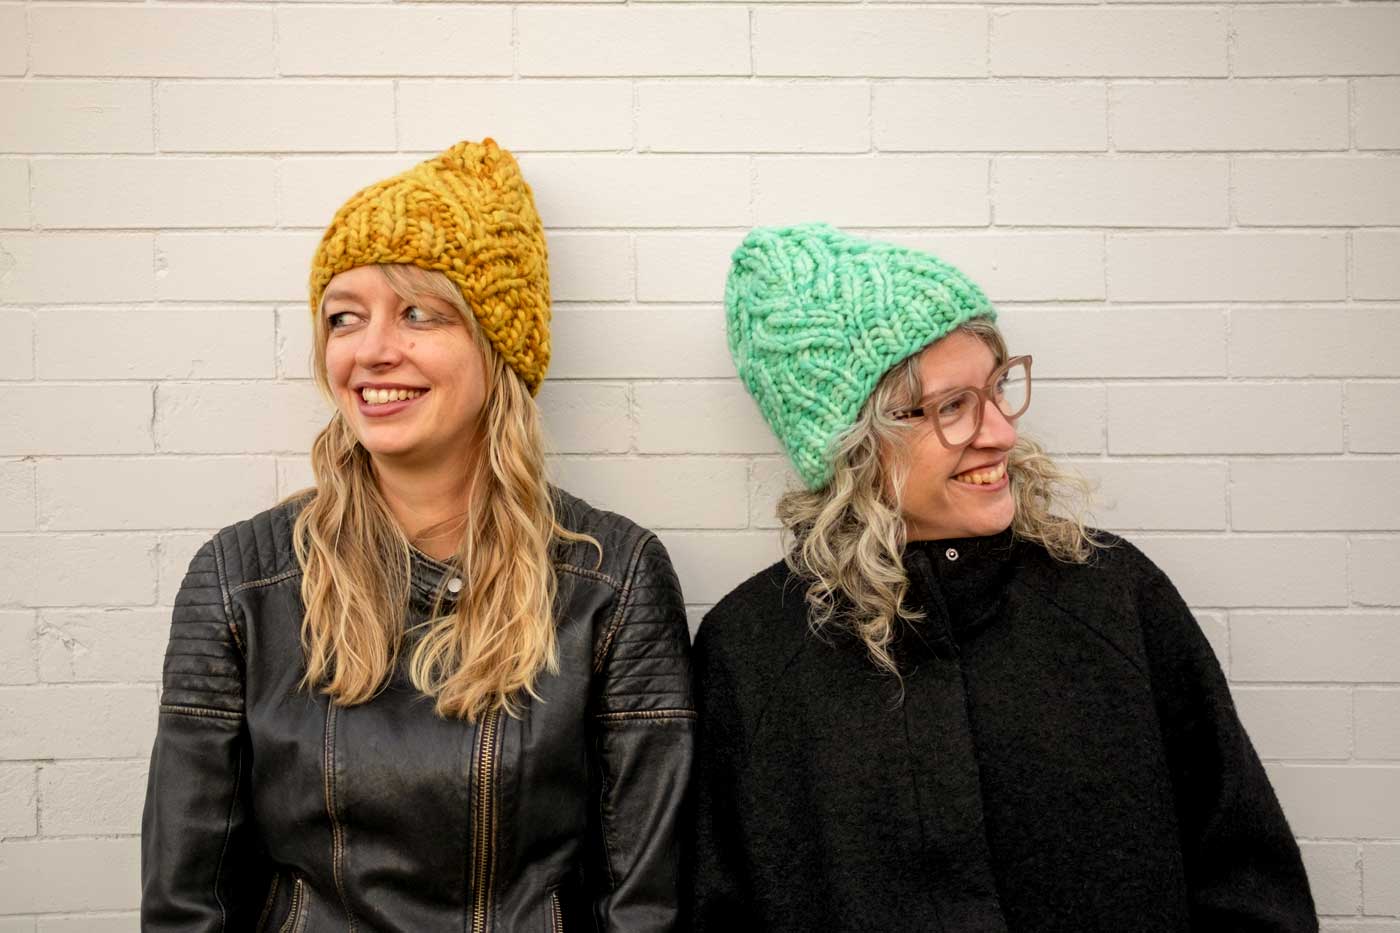 Amber in a yellow Neighborhood Holiday hat and Jaime in a mint green one, standing against a white brick wall.